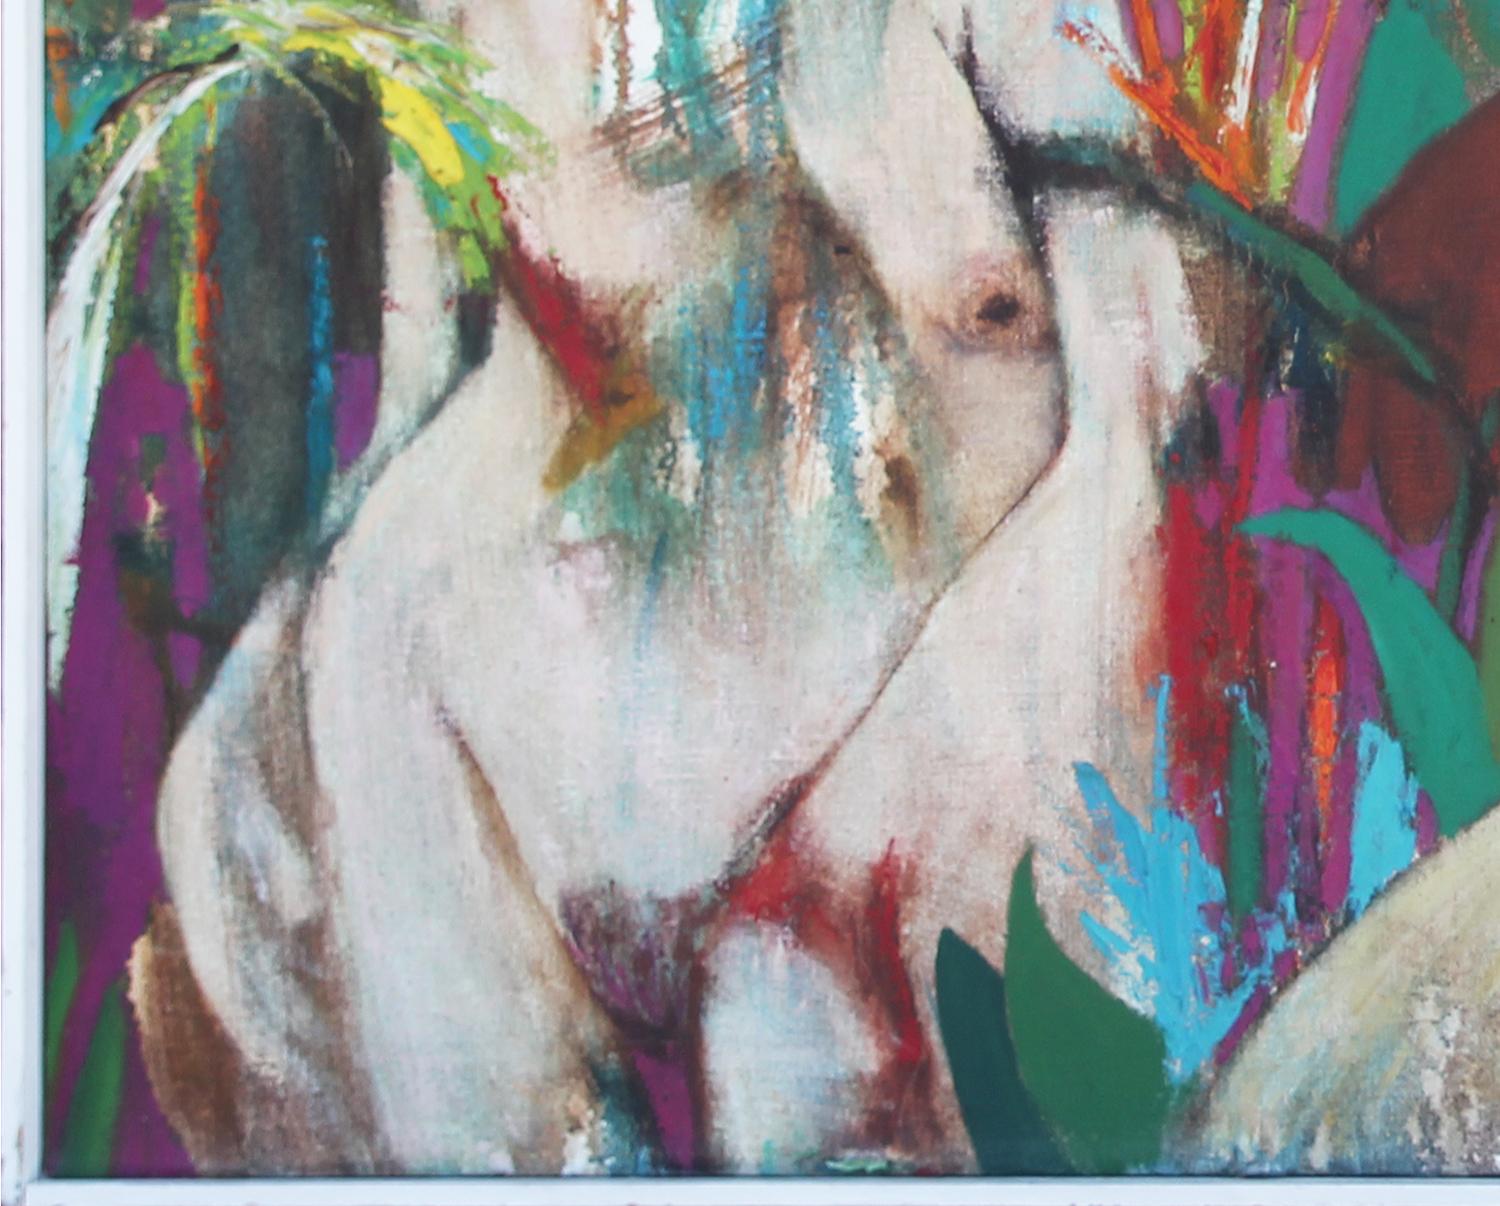 Modern colorful abstract painting by Texas artist Don Snell. The work features two central nude female figures standing next to an animal in a tropical landscape. Signed in front lower right corner. Currently hung in a painted white frame.